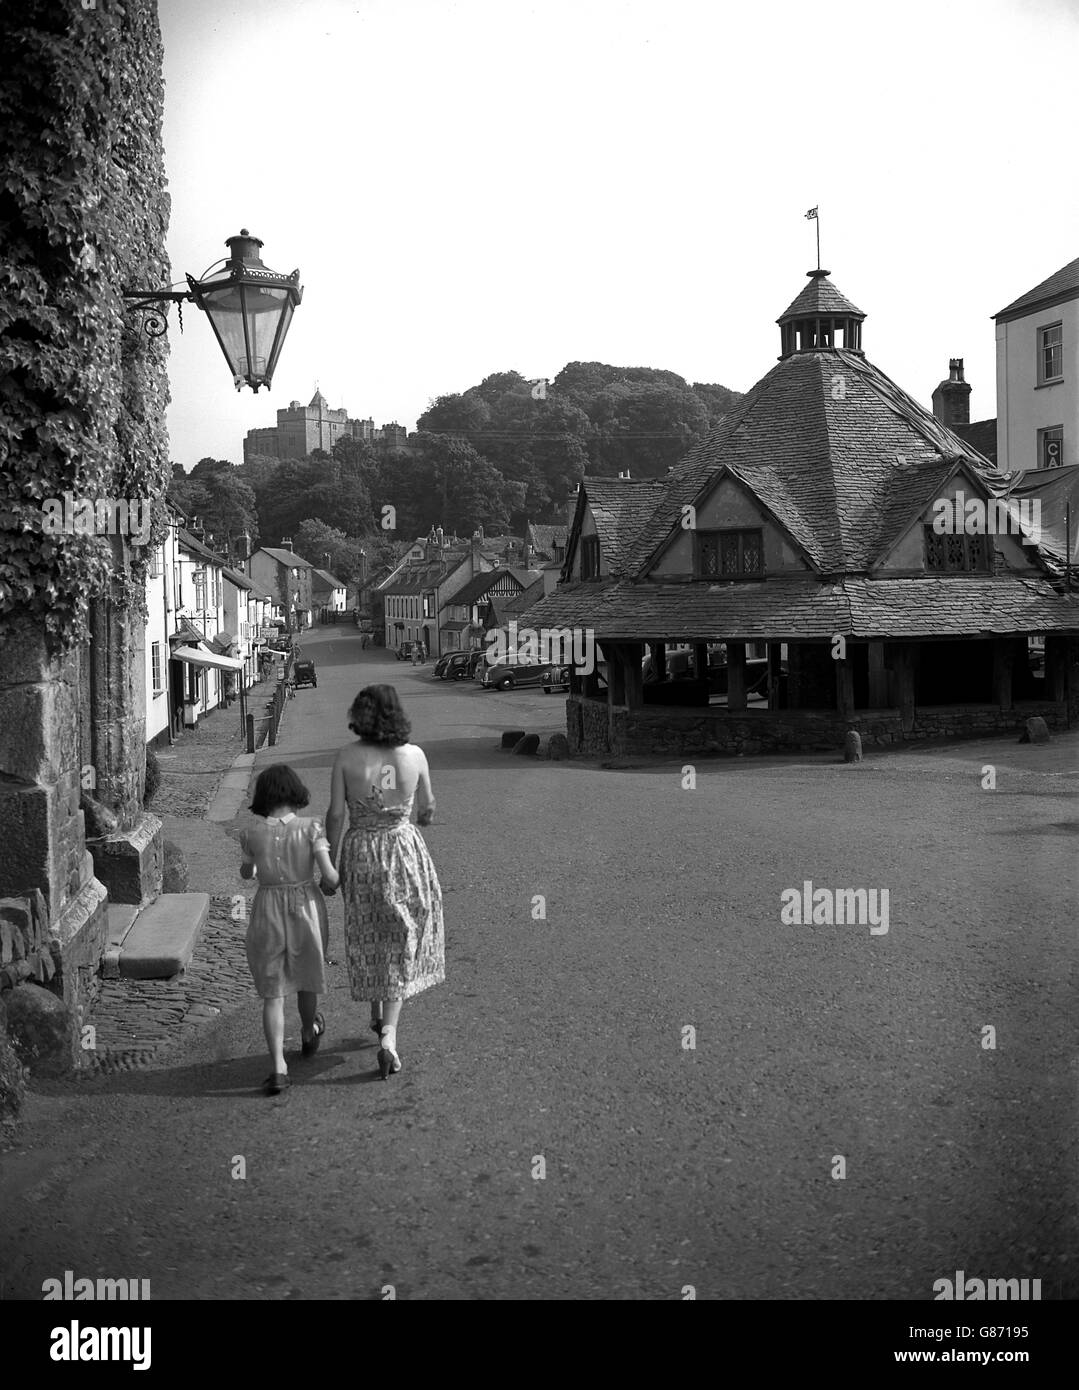 The main street in Dunster, Somerset, which features an ancient Yarn Market, built in 1609. In the background can be seen part of Dunster Castle, home of Geoffrey Luttrell. Stock Photo